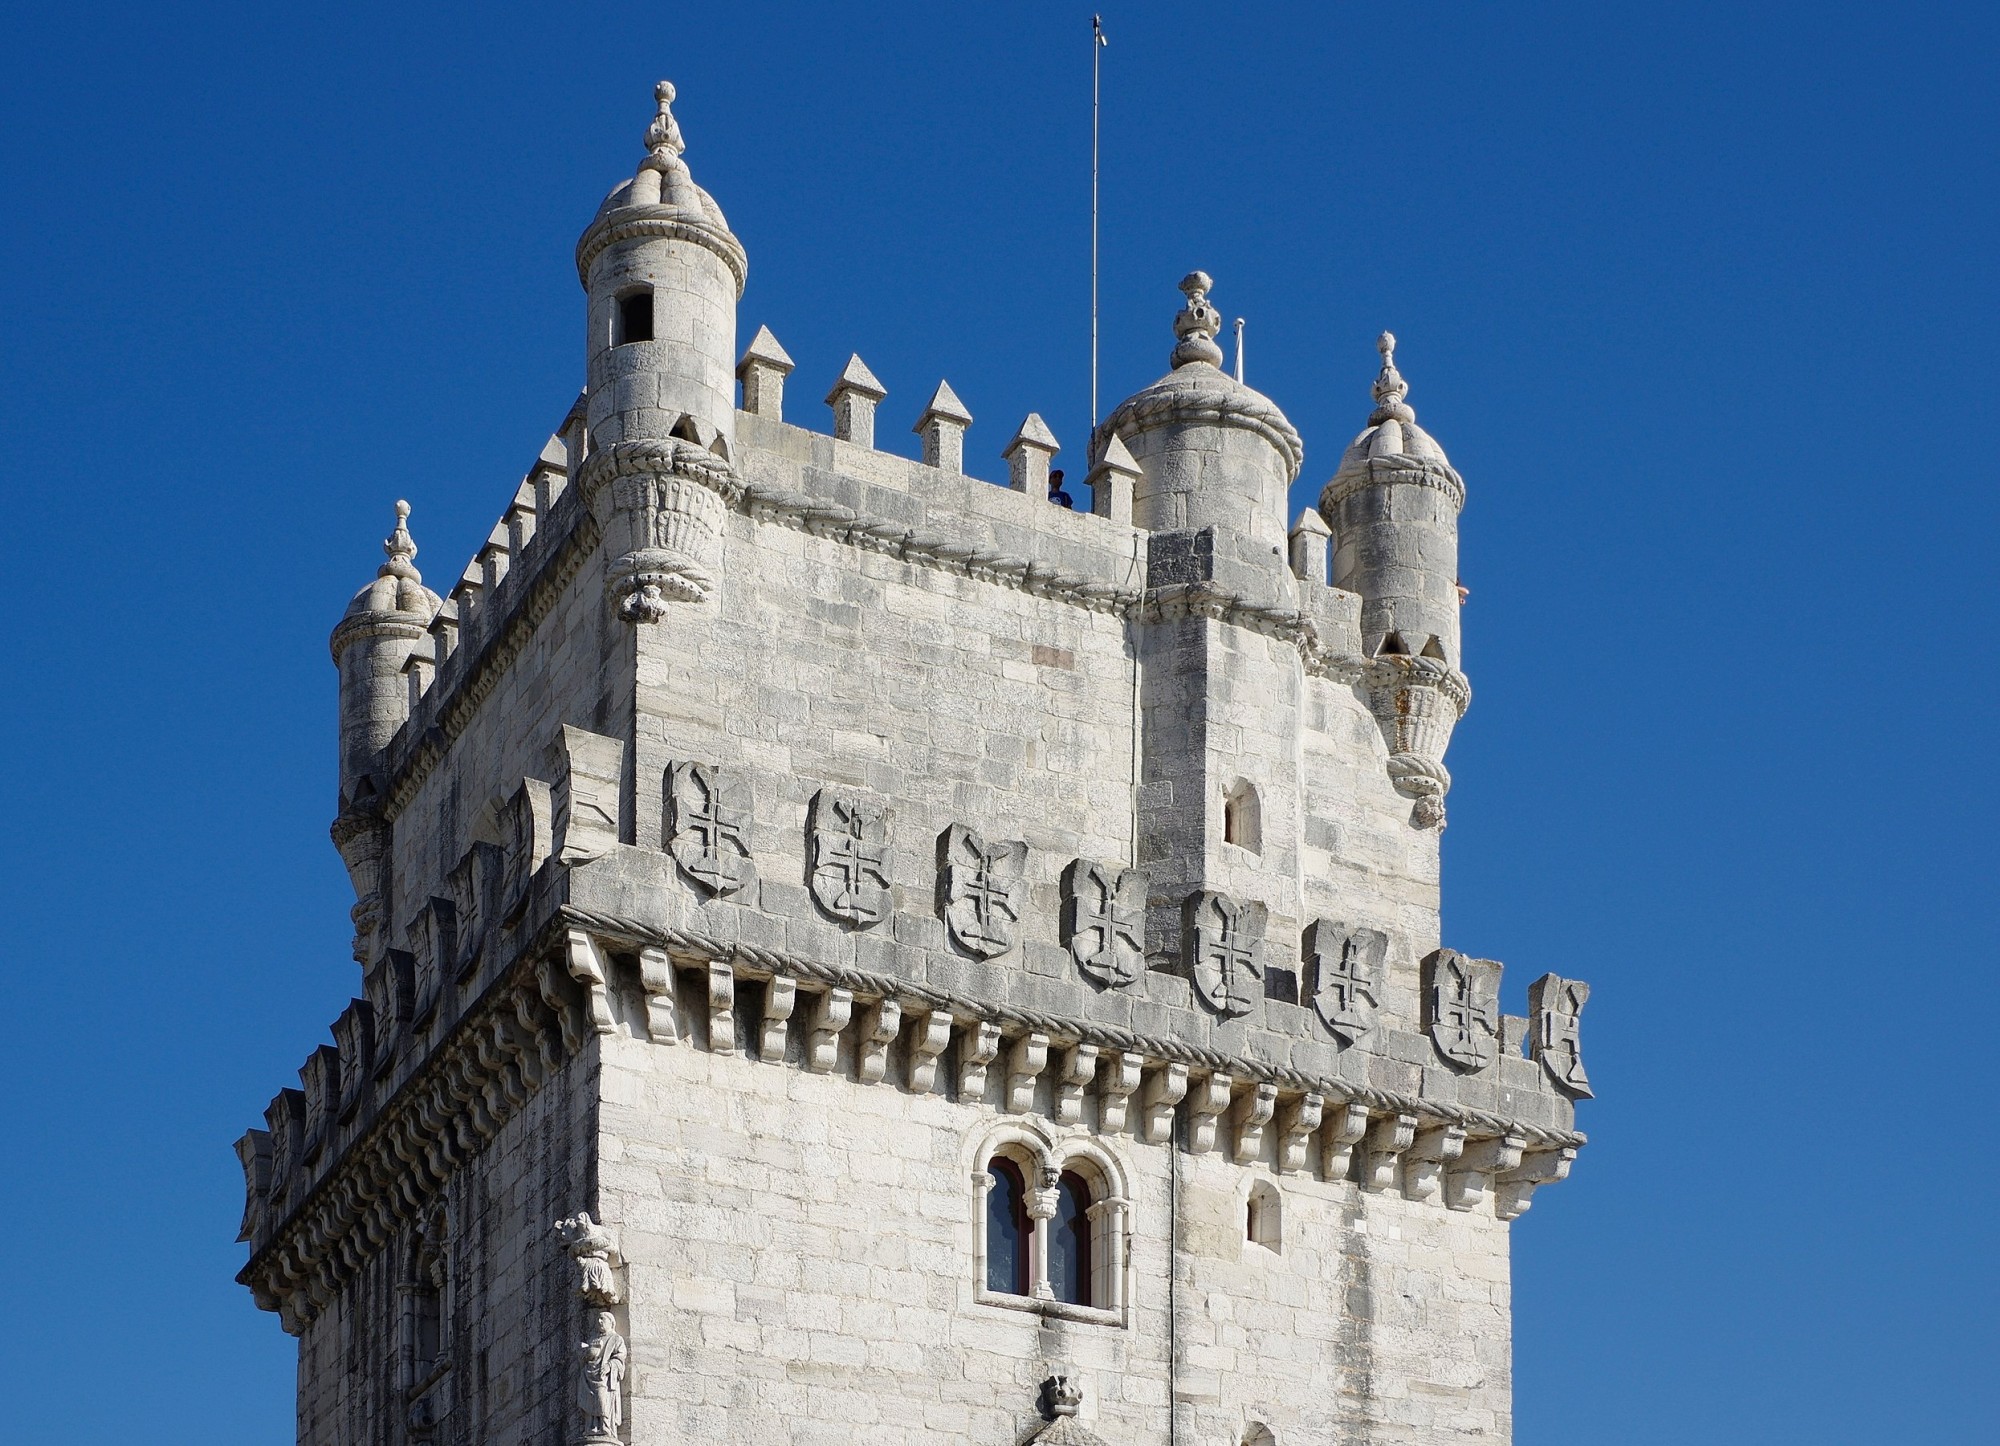 Built with cream-colored lioz limestone, the 100-foot-tall fortress has survived numerous restorations and the disastrous earthquake of 1755. It remains an example of Portugal's maritime history and architectural ingenuity.